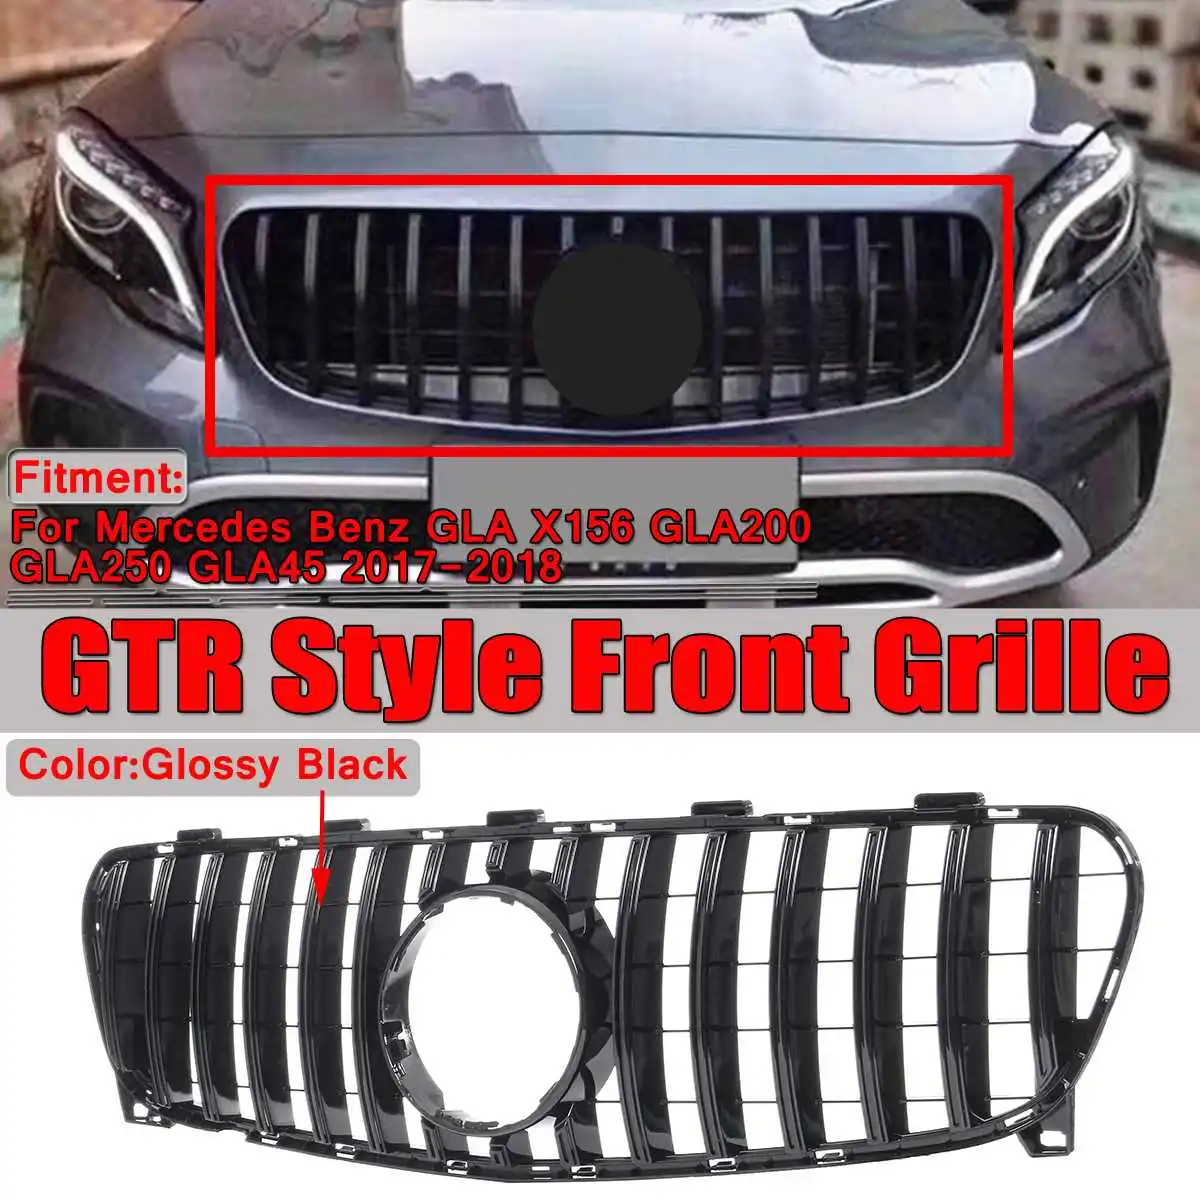 

New GT R Style Grille Black Car Front Bumper Grille Grill For Mercedes For Benz GLA X156 GLA200 GLA250 GLA45 For AMG 2017-2018